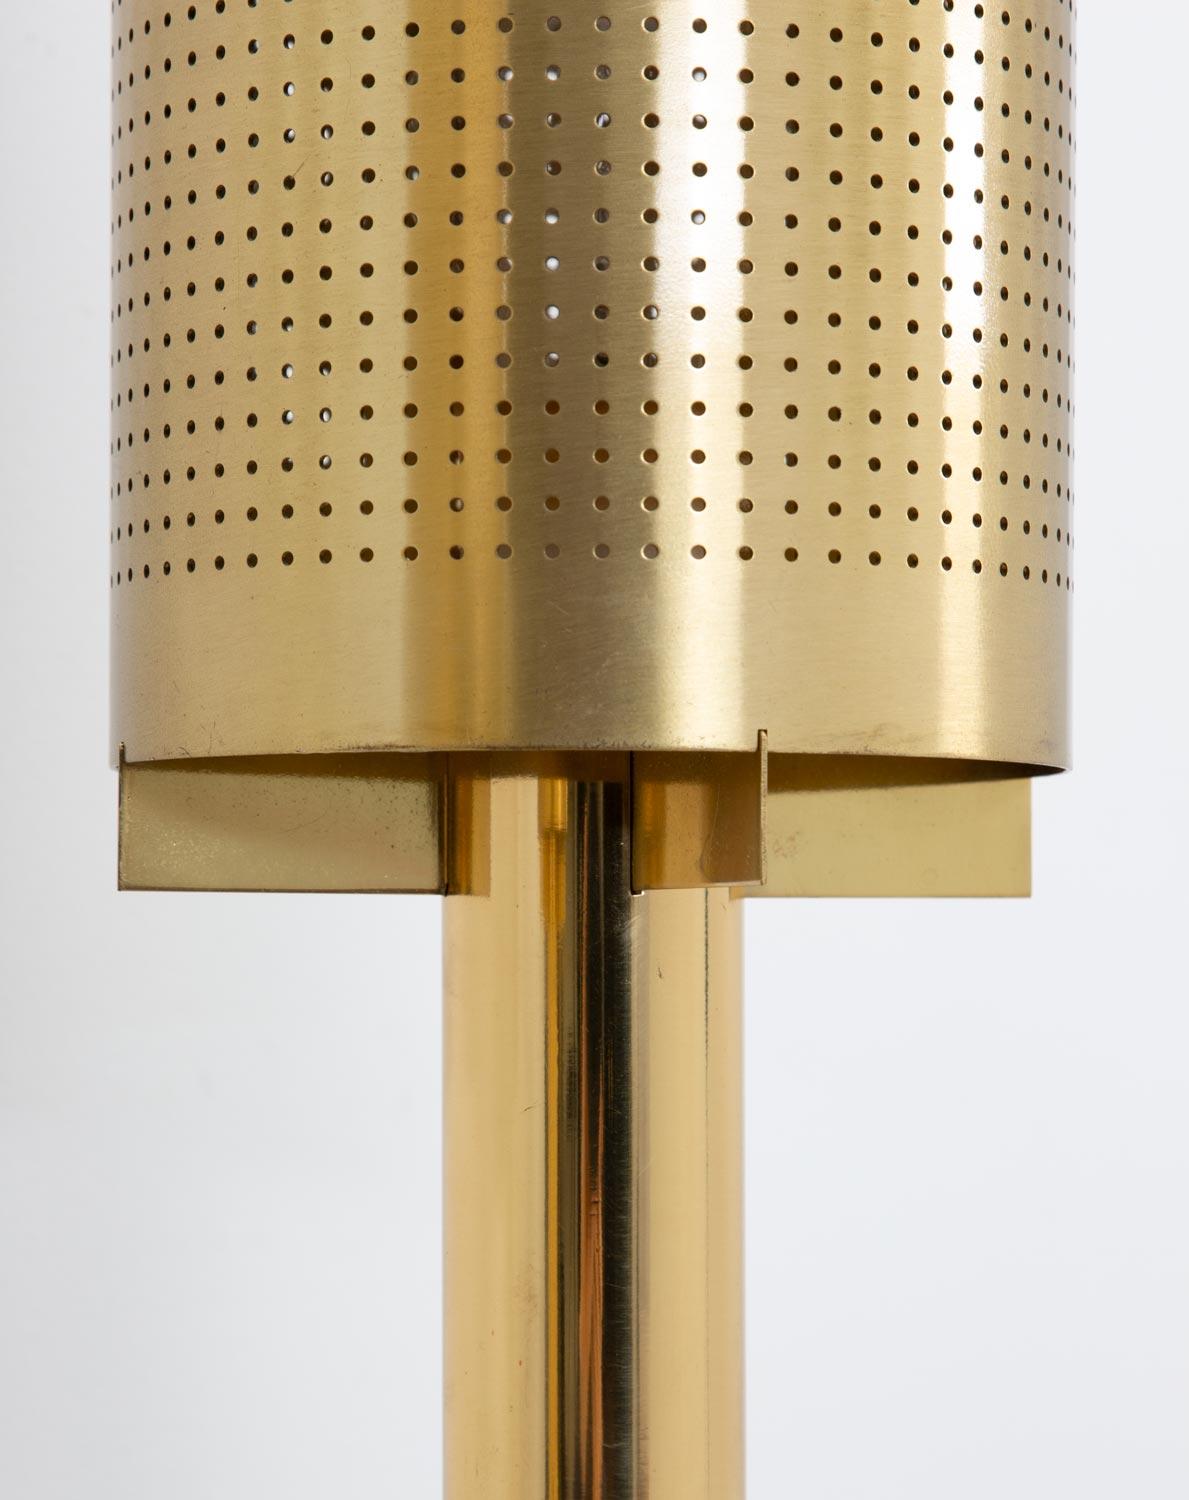 Large Midcentury Scandinavian Wall Sconces in Perforated Brass For Sale 3